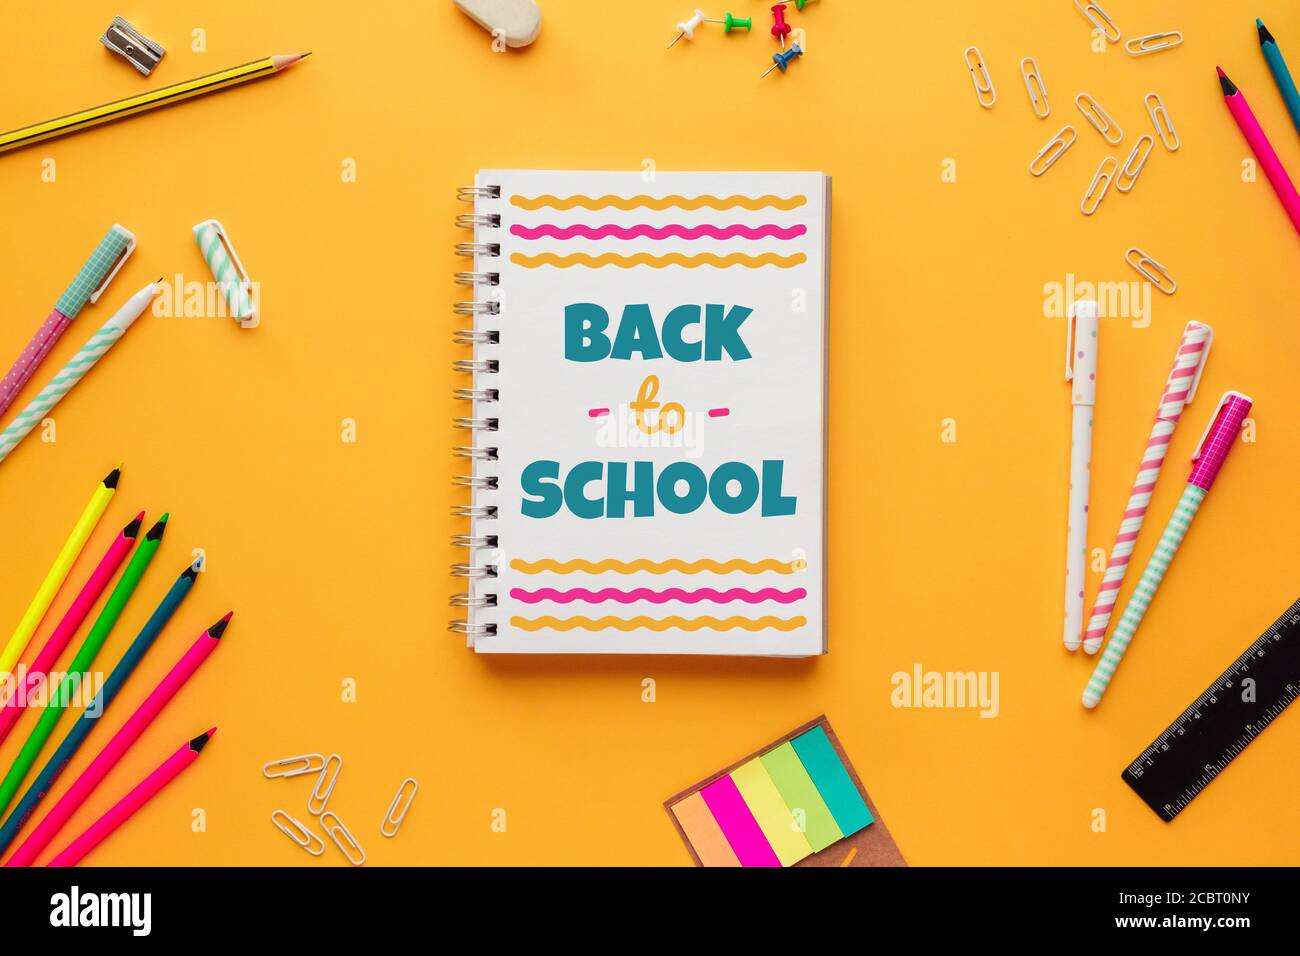 Stock photo of back to school concept with a notebook with lettering and some stationery objects on a yellow background Stock Photo